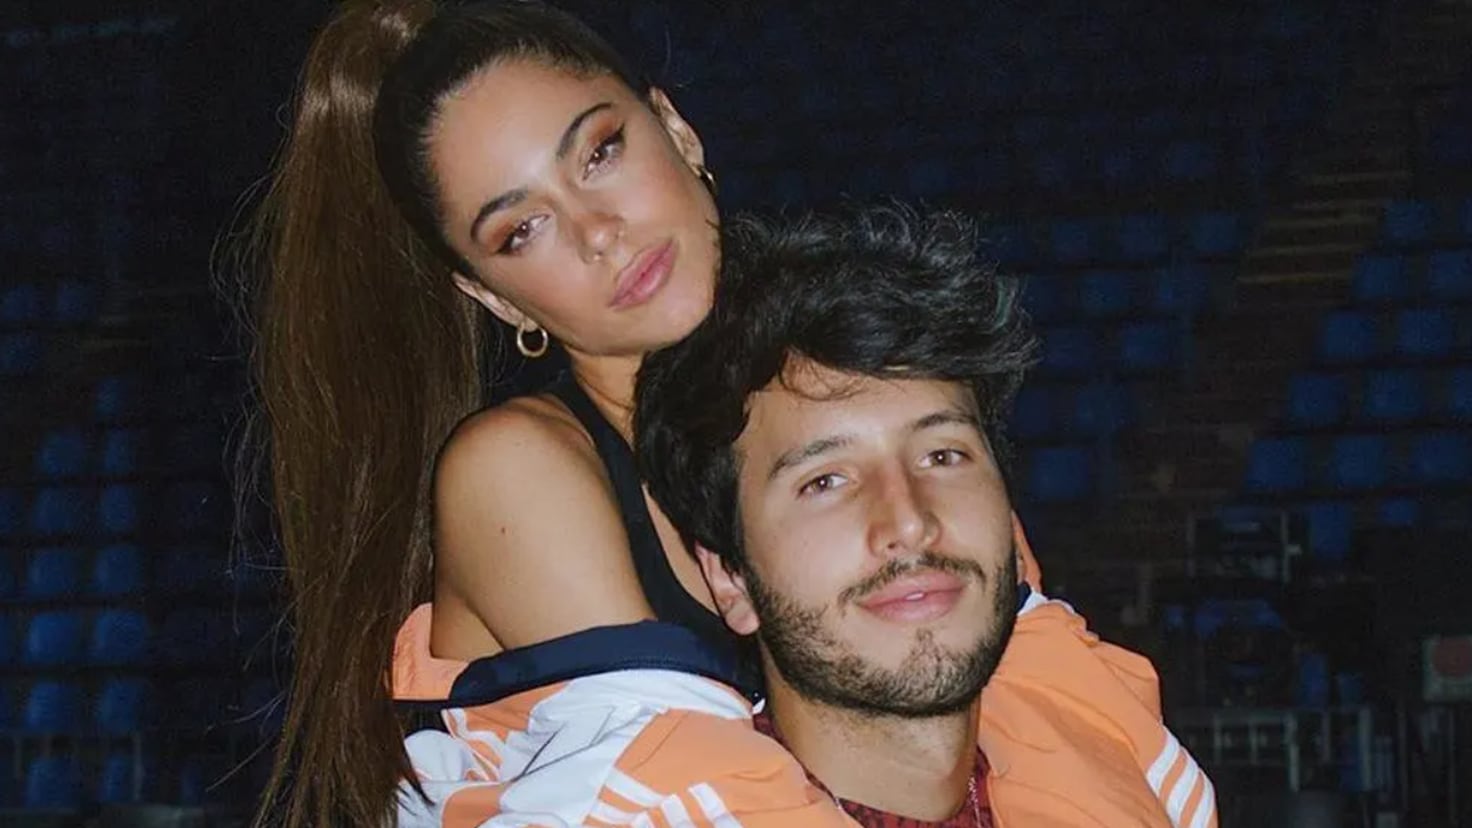 Sebastin Yatra returns to the fray with Tini Stoessel after breaking up with Aitana
